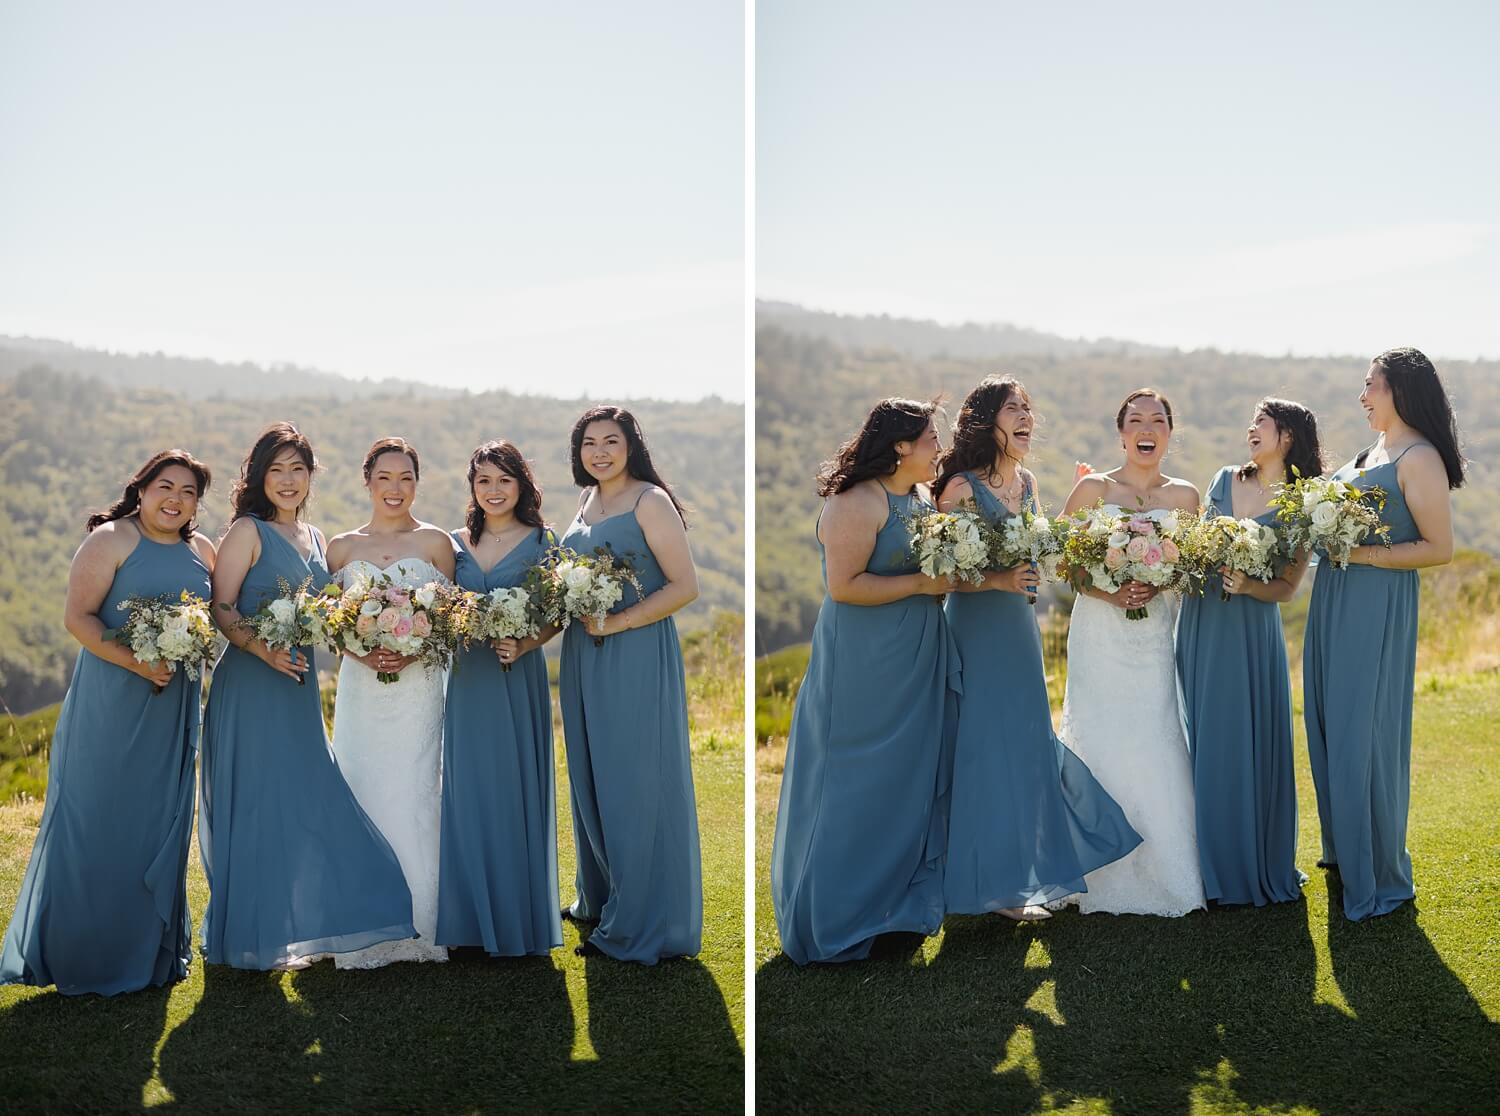 Bridesmaids laughing in sunny field